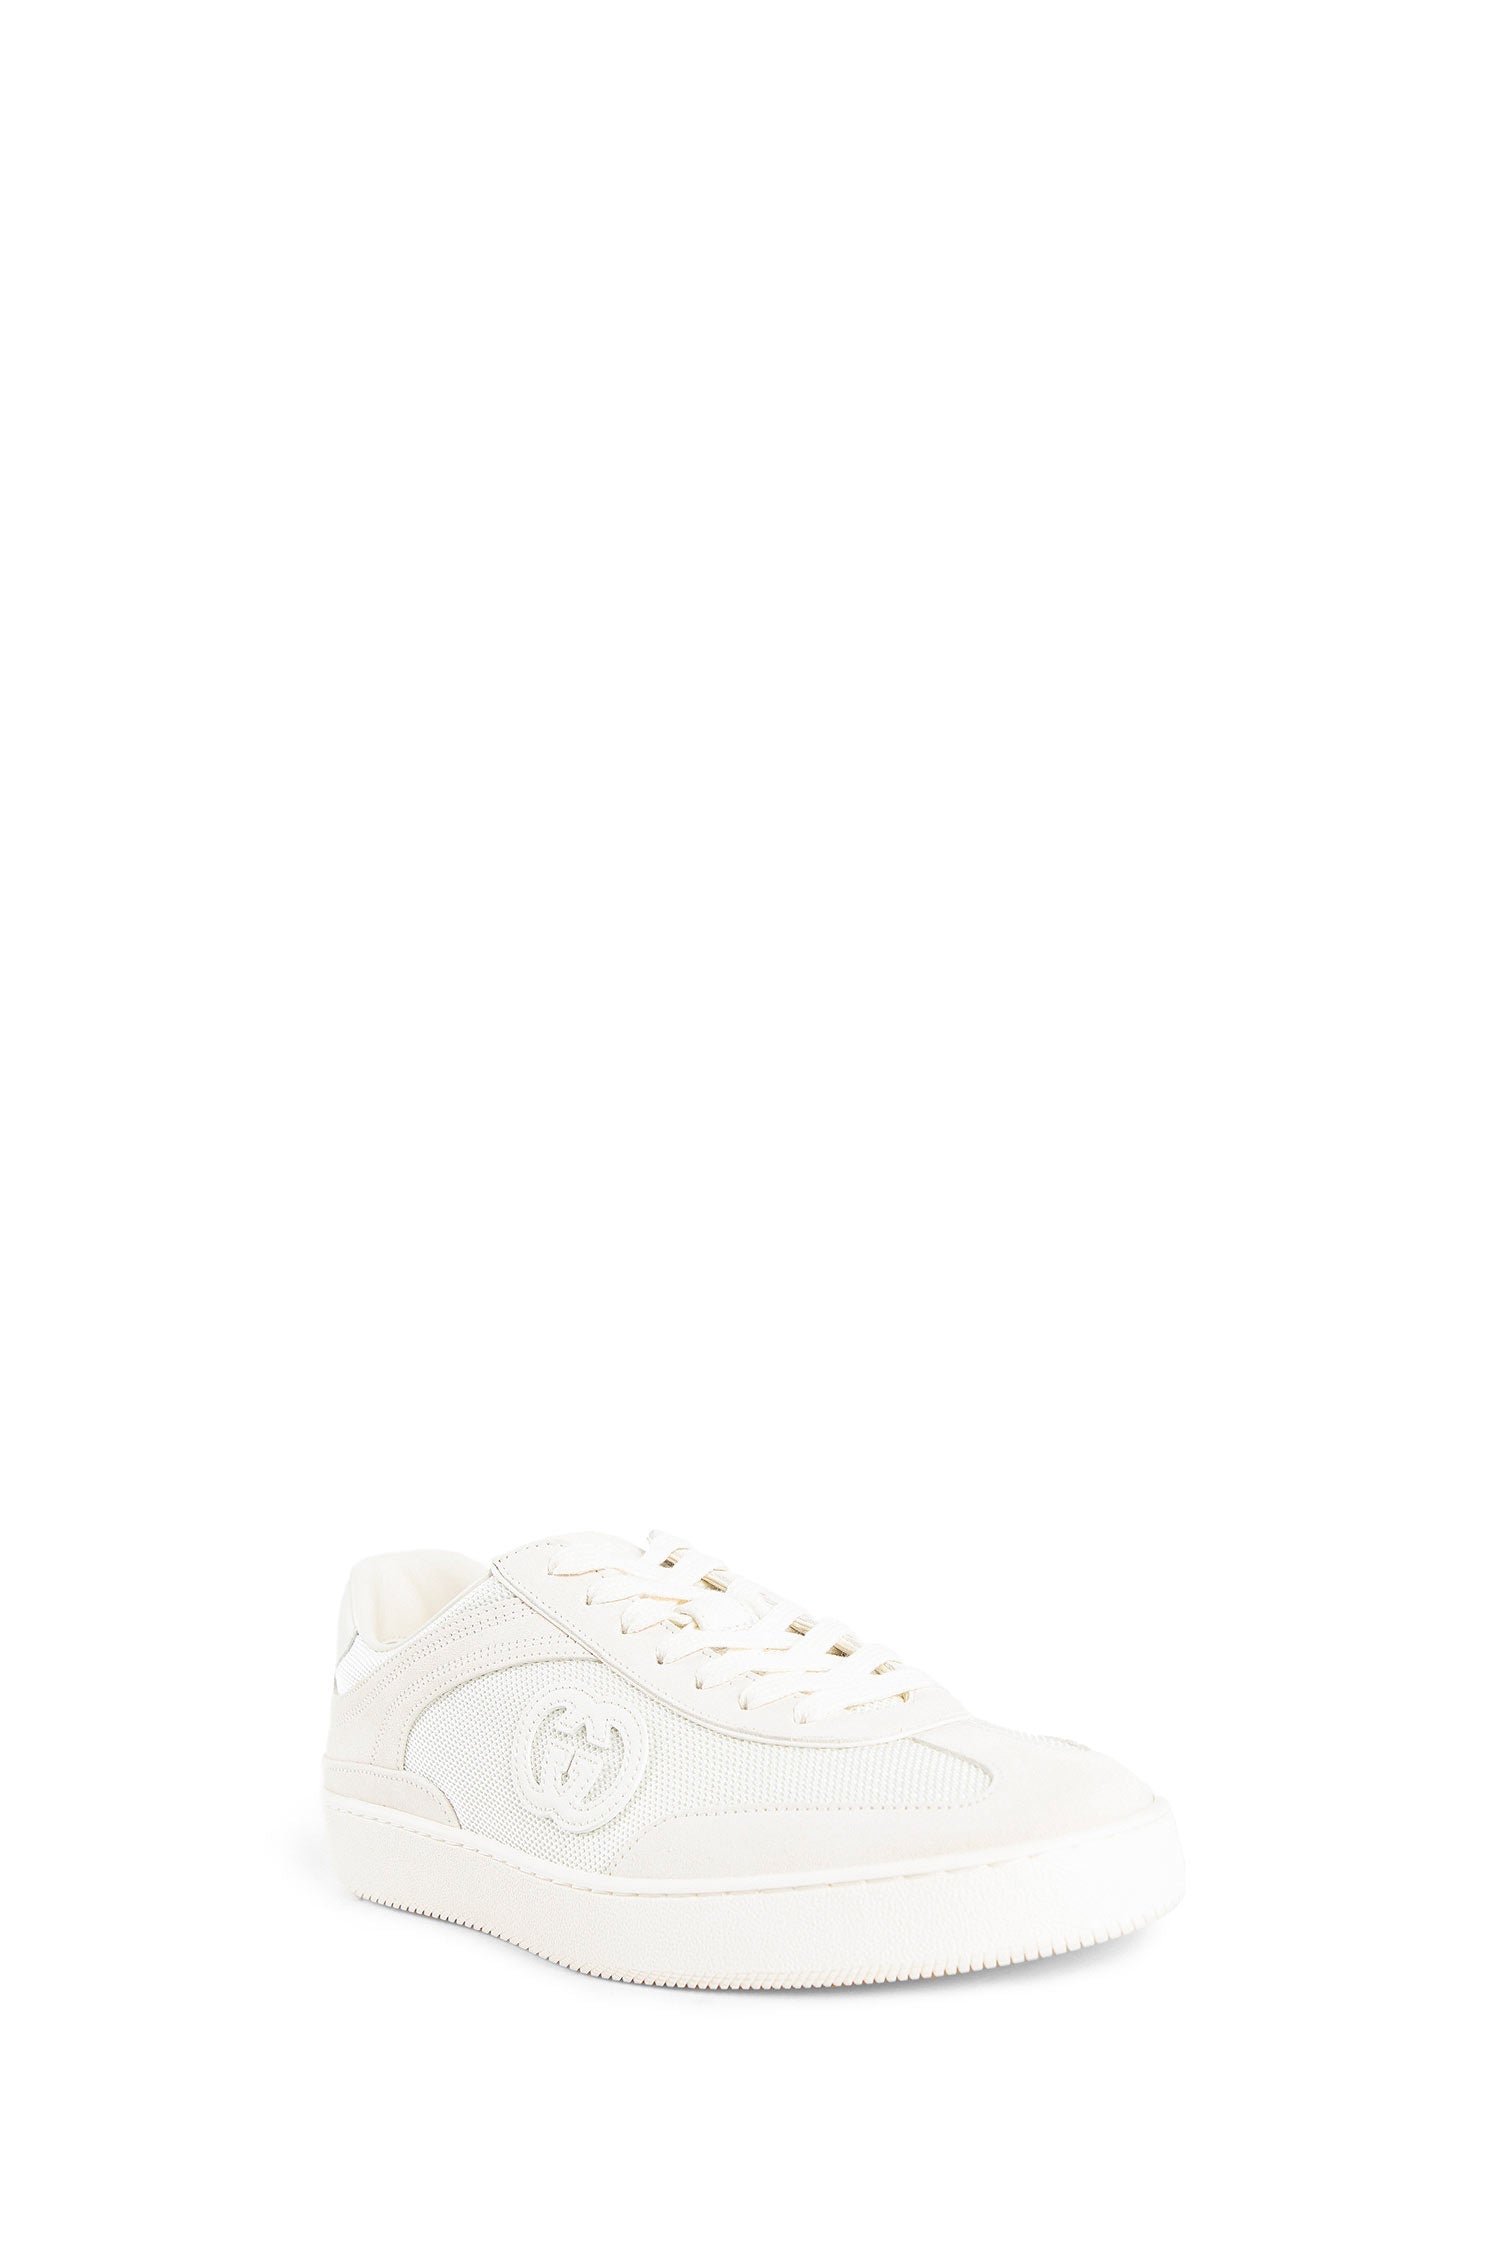 GUCCI MAN OFF-WHITE SNEAKERS